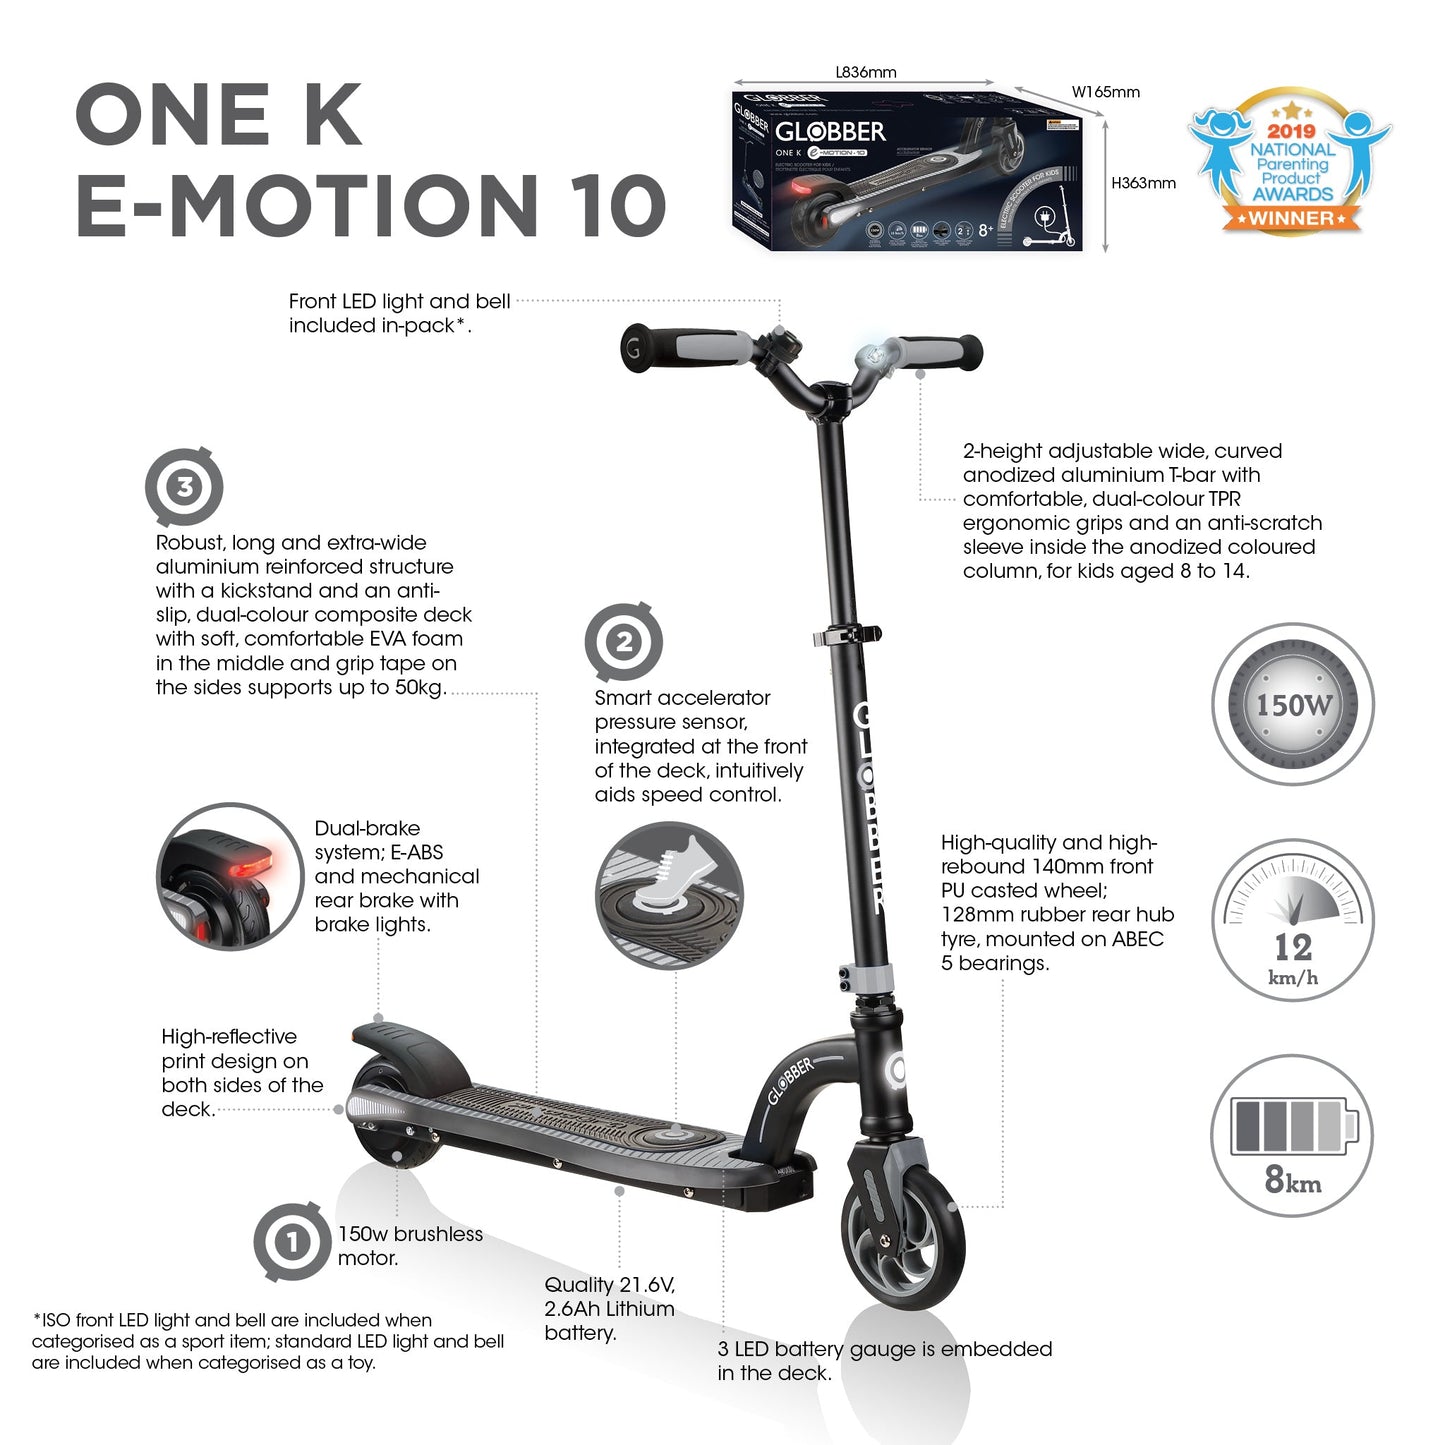 One K E-Motion 10 Electric Scooter: 2-Wheel Electric Scooter for Teens - Grey/Black